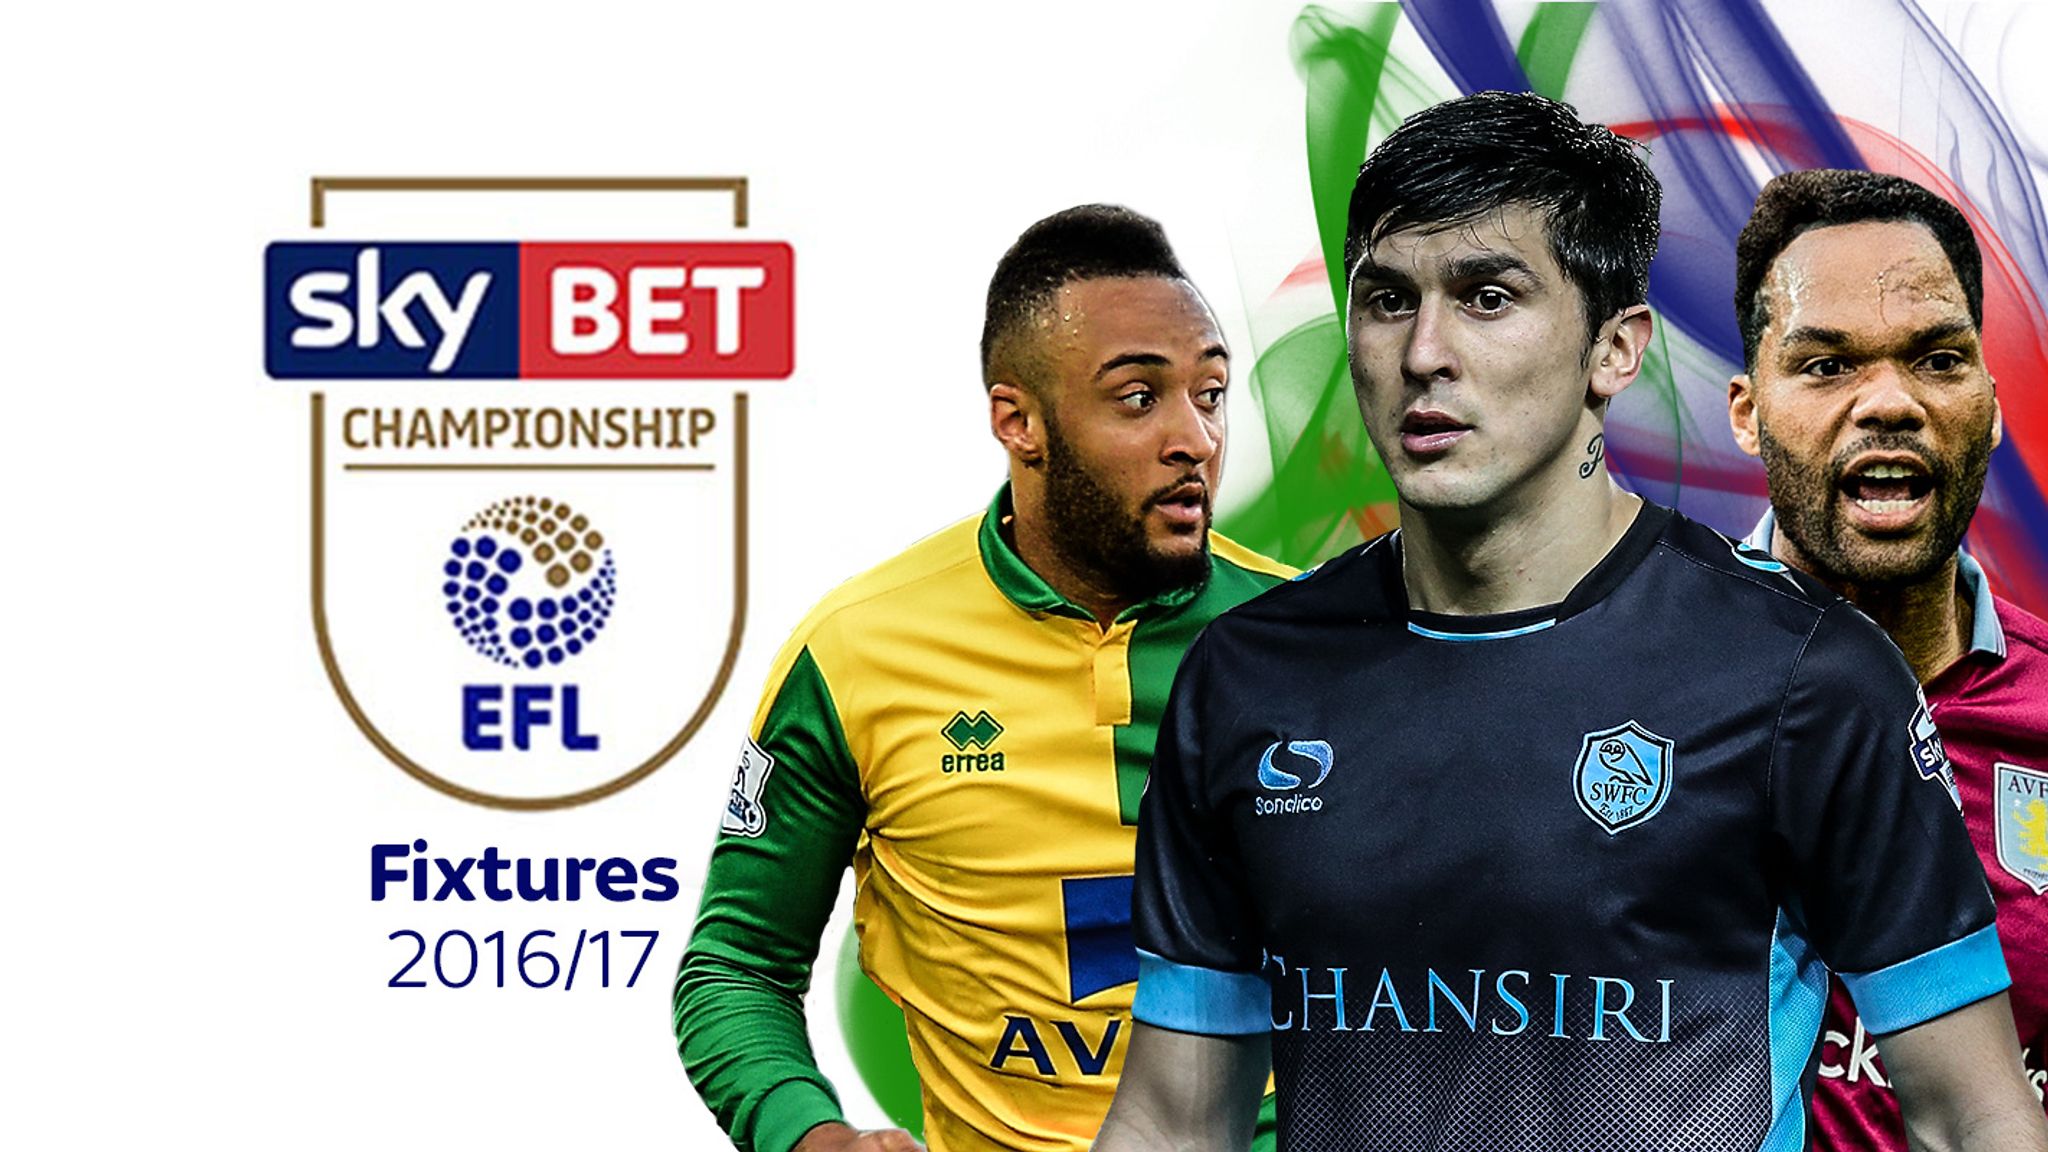 EFL Championship Fixtures And Results 16/17 - The Championship Table